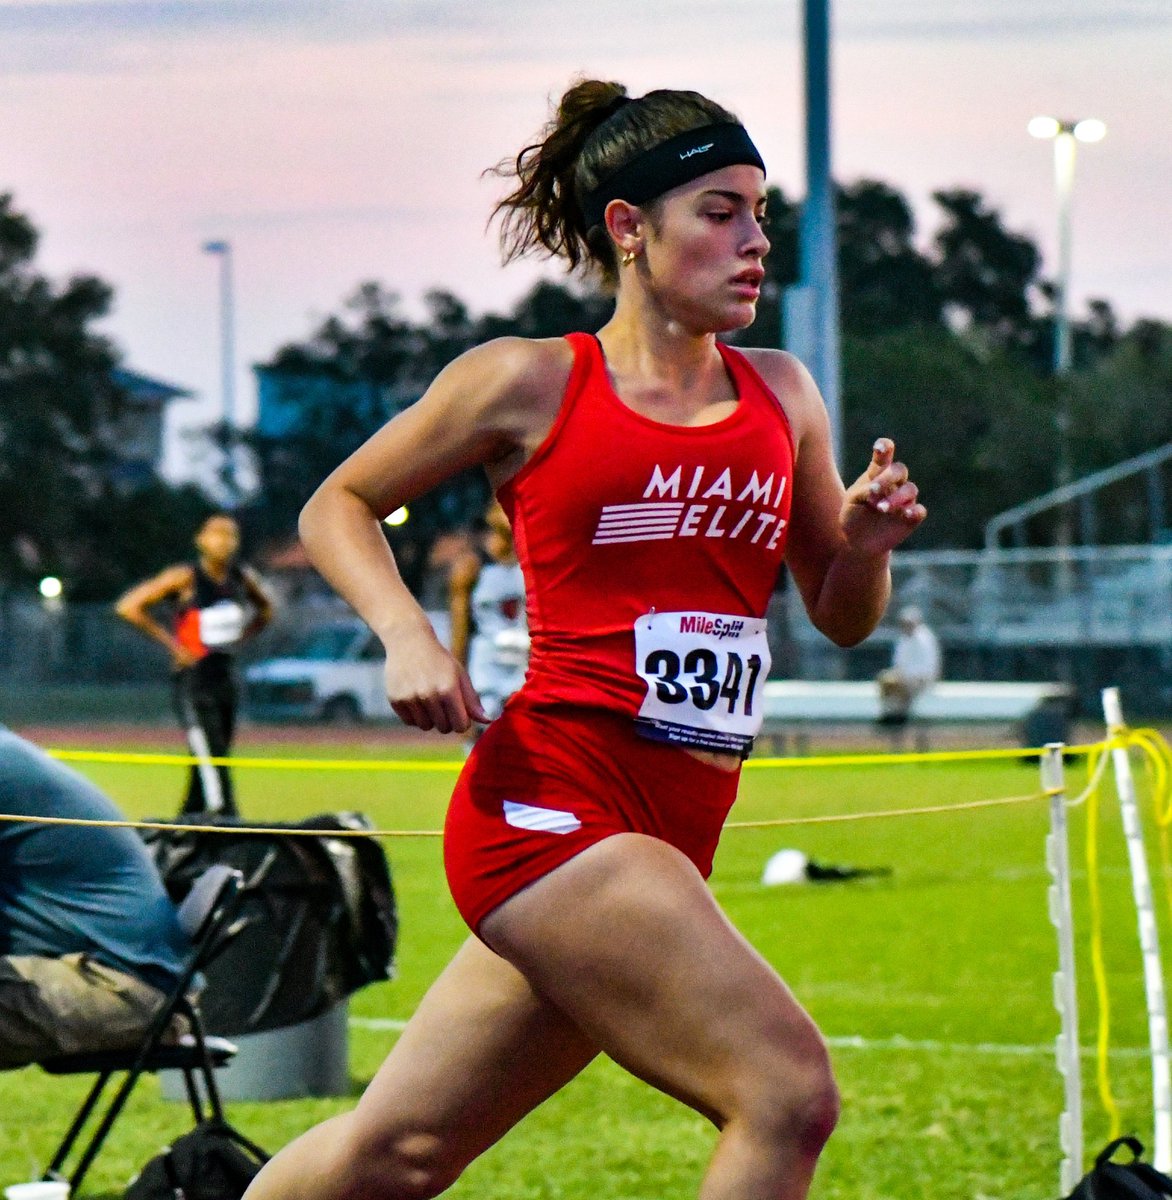 Sophomore Lucia Castillo-Rios ran a PR in the 800m running 2:23.33 at the @flmilesplit PR Festival to jump start her 2023 track season! 

Lucia will be looking to make an impact from the 400m to the 1600m to highlight her versatility 🏃‍♀️ 
---
#track #trackandfield #usatf #aau